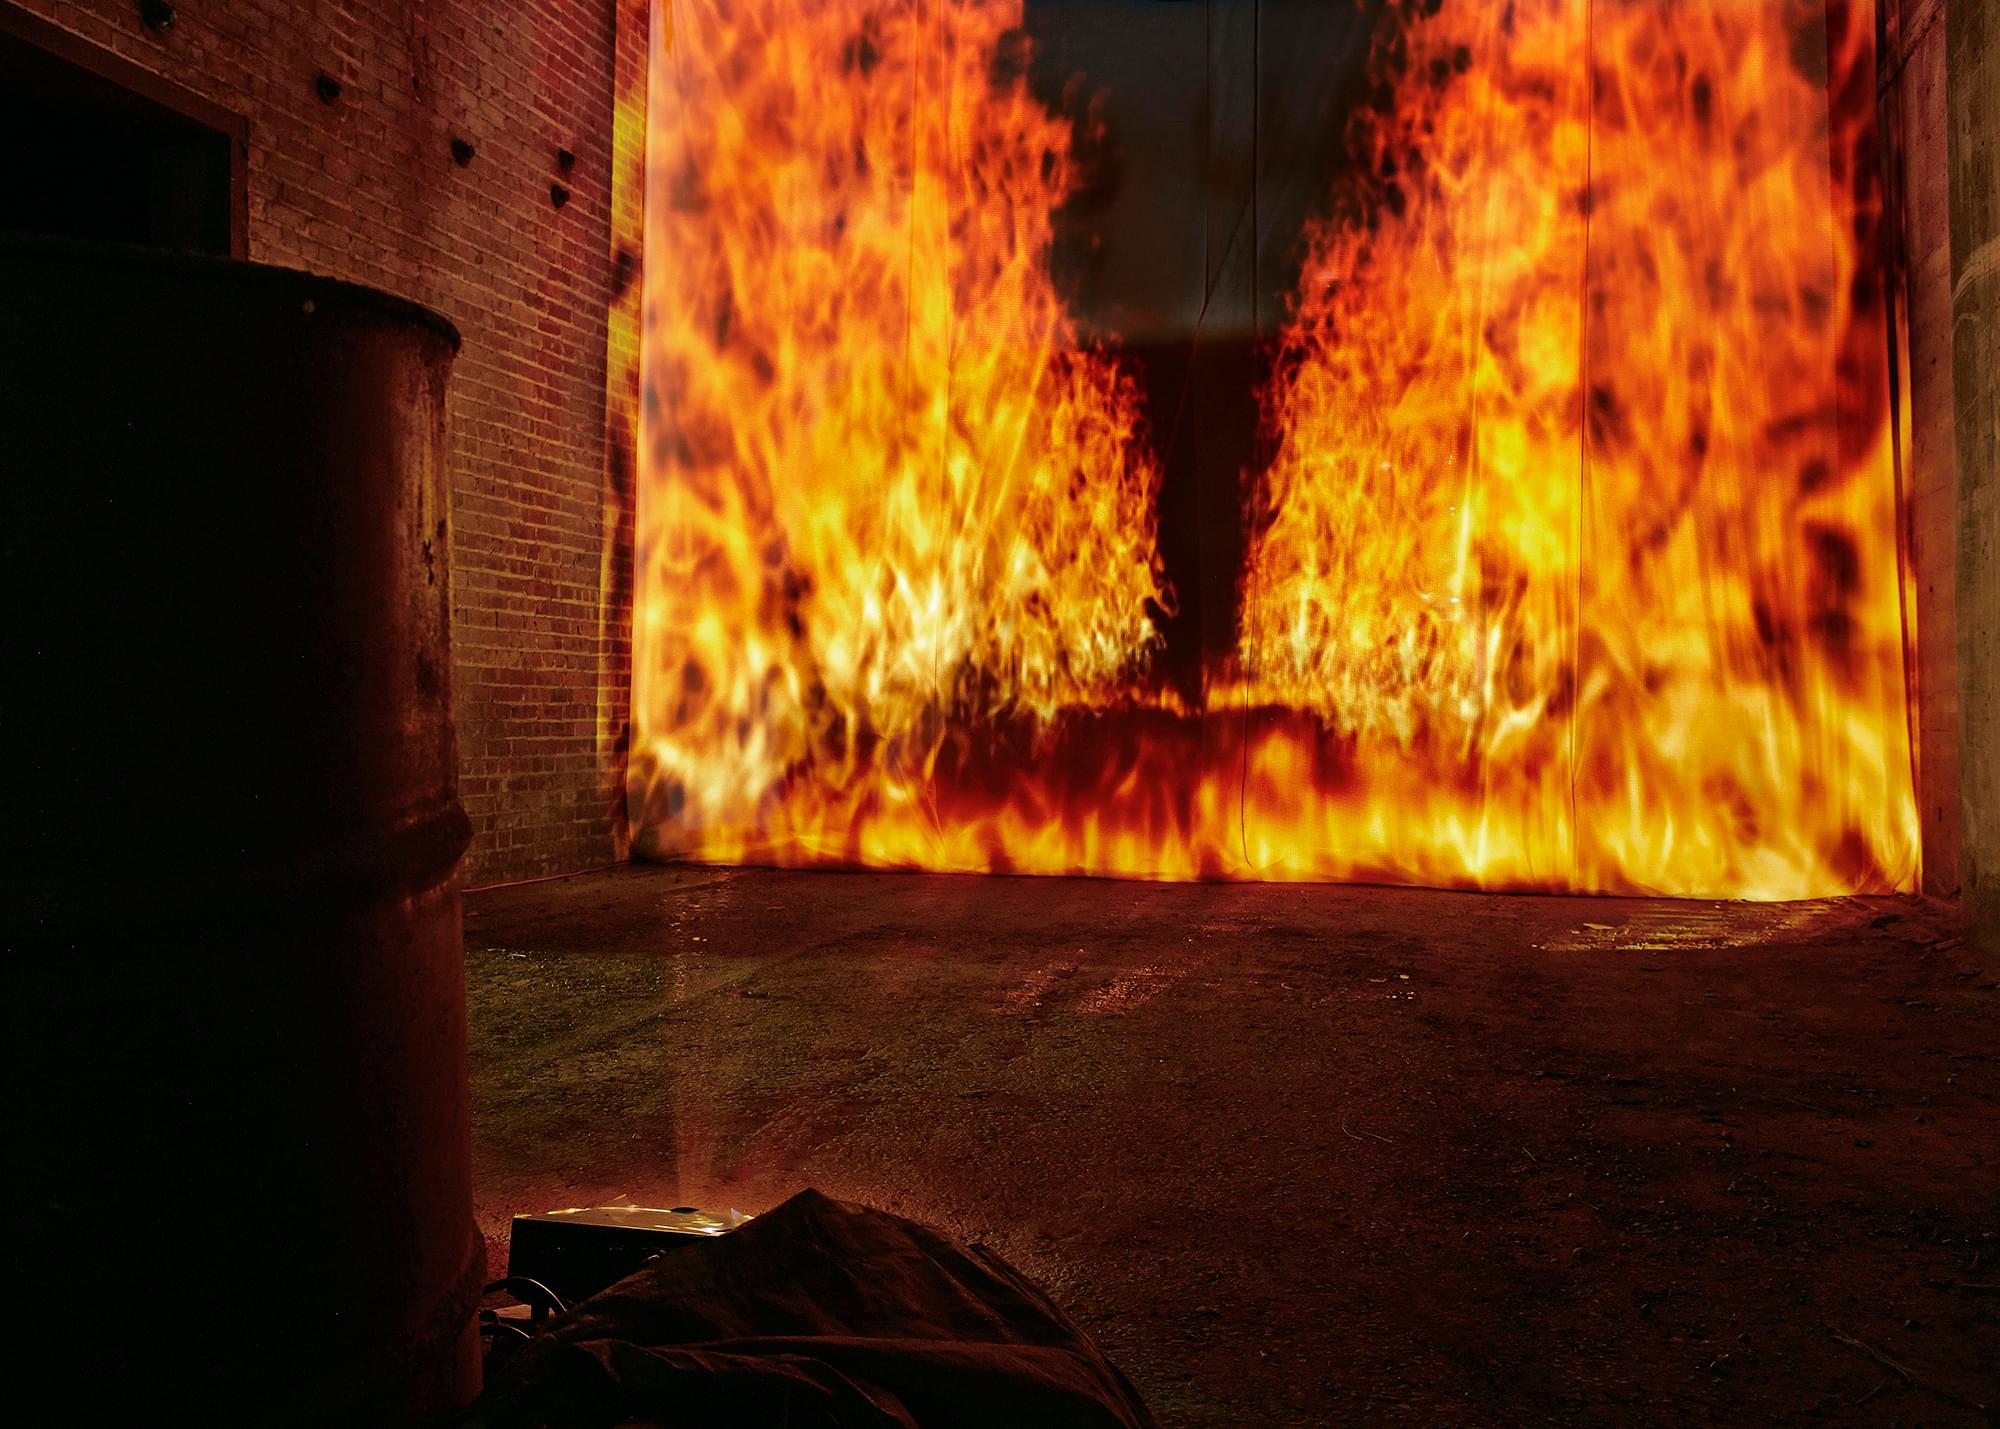 Close up nighttime photograph of an oil drum on the left and a (projected) raging firescape in the background towards the right